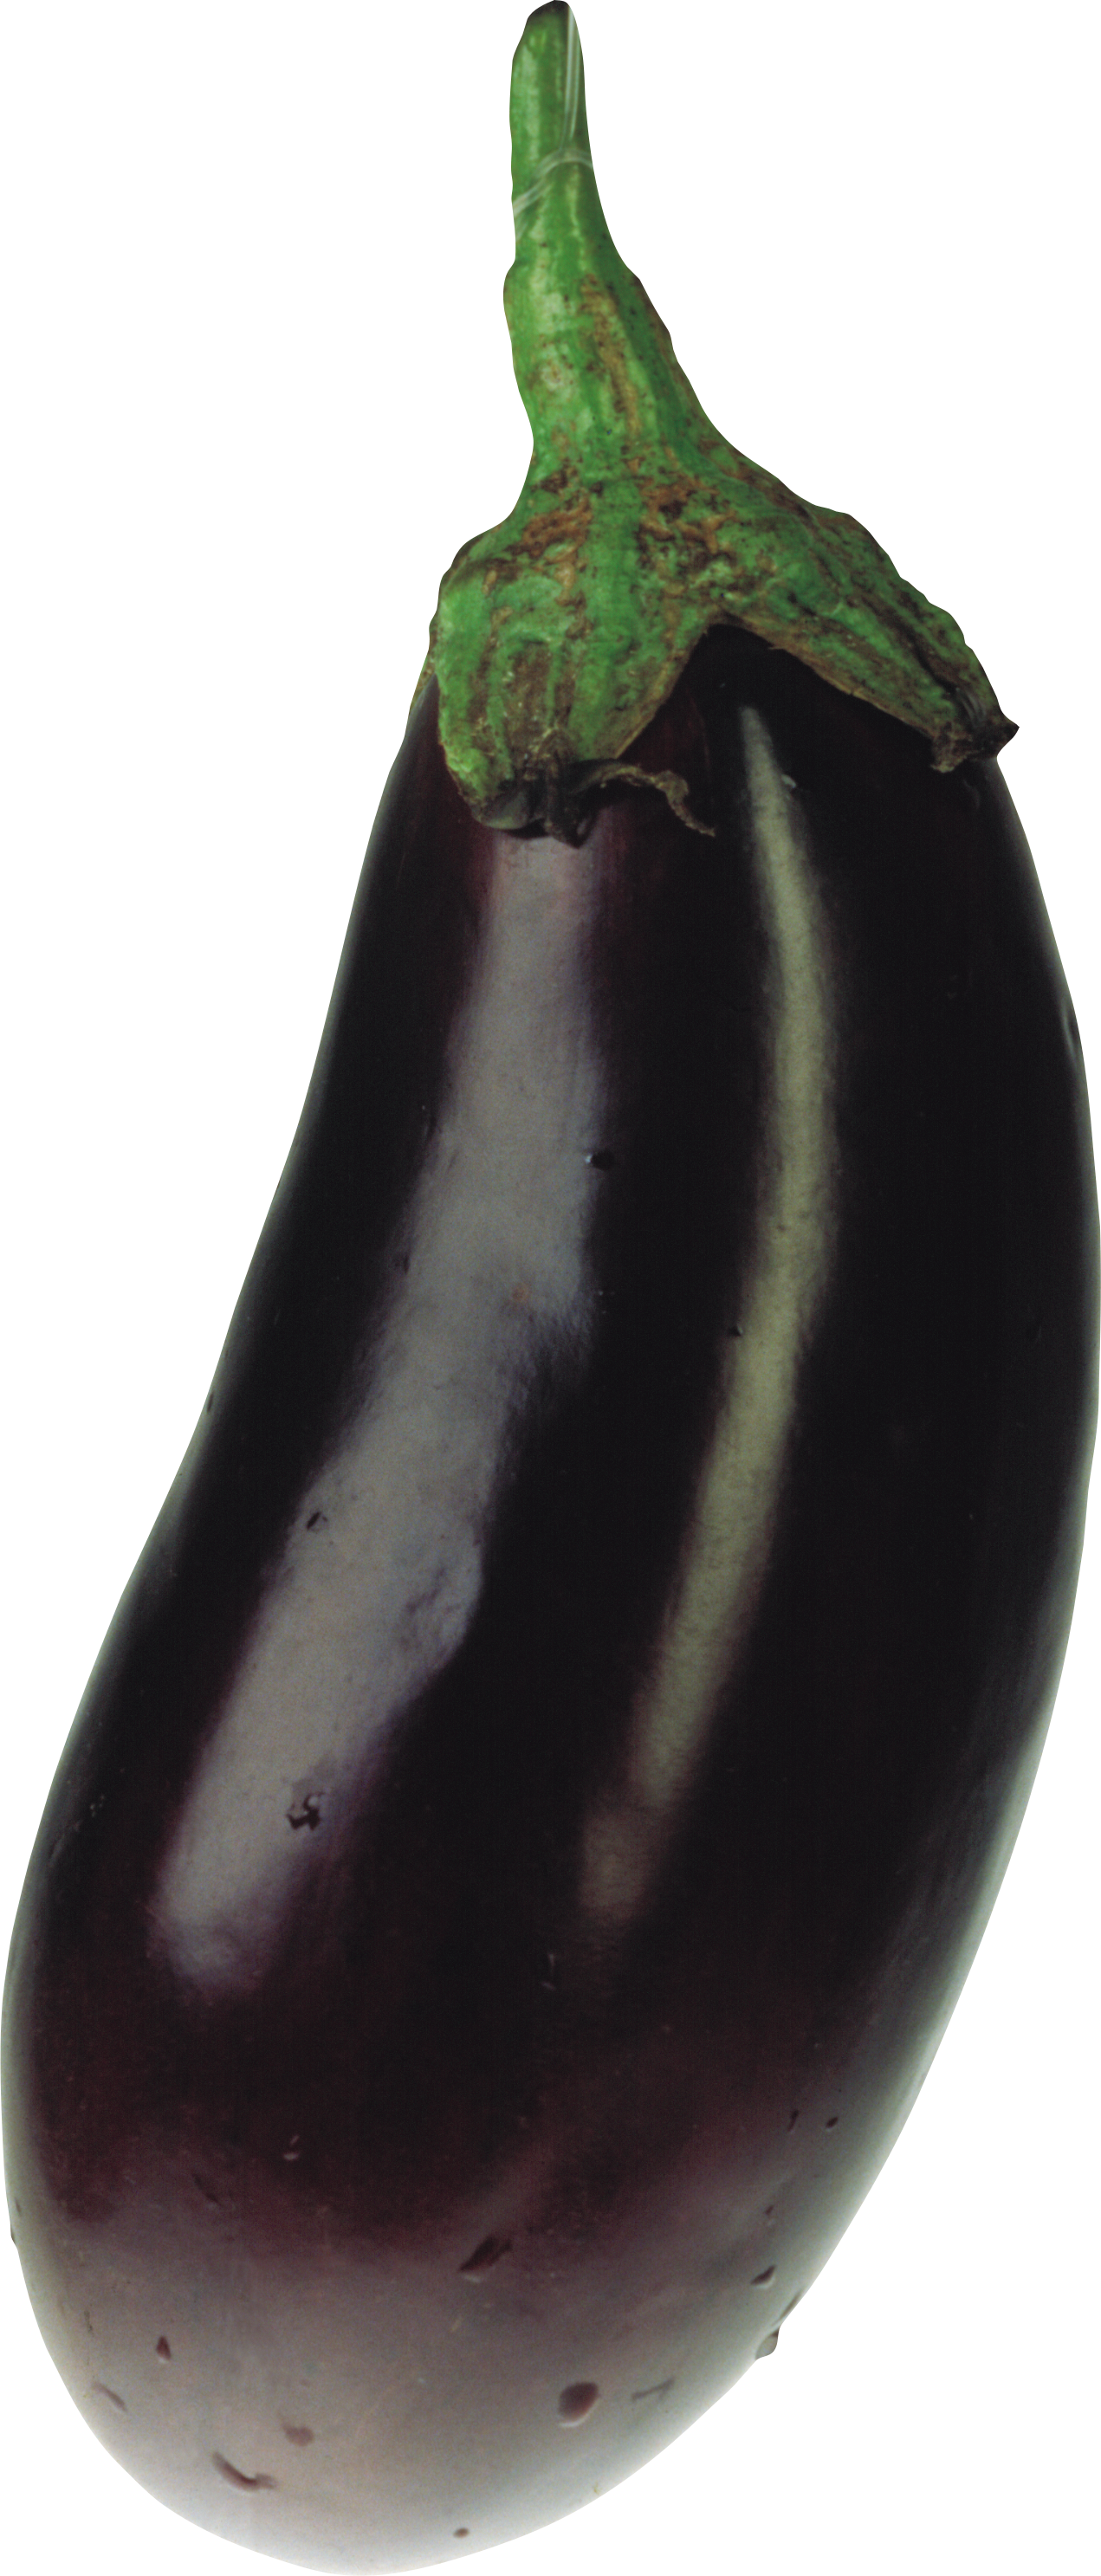 download eggplant png image for free download eggplant png image for free